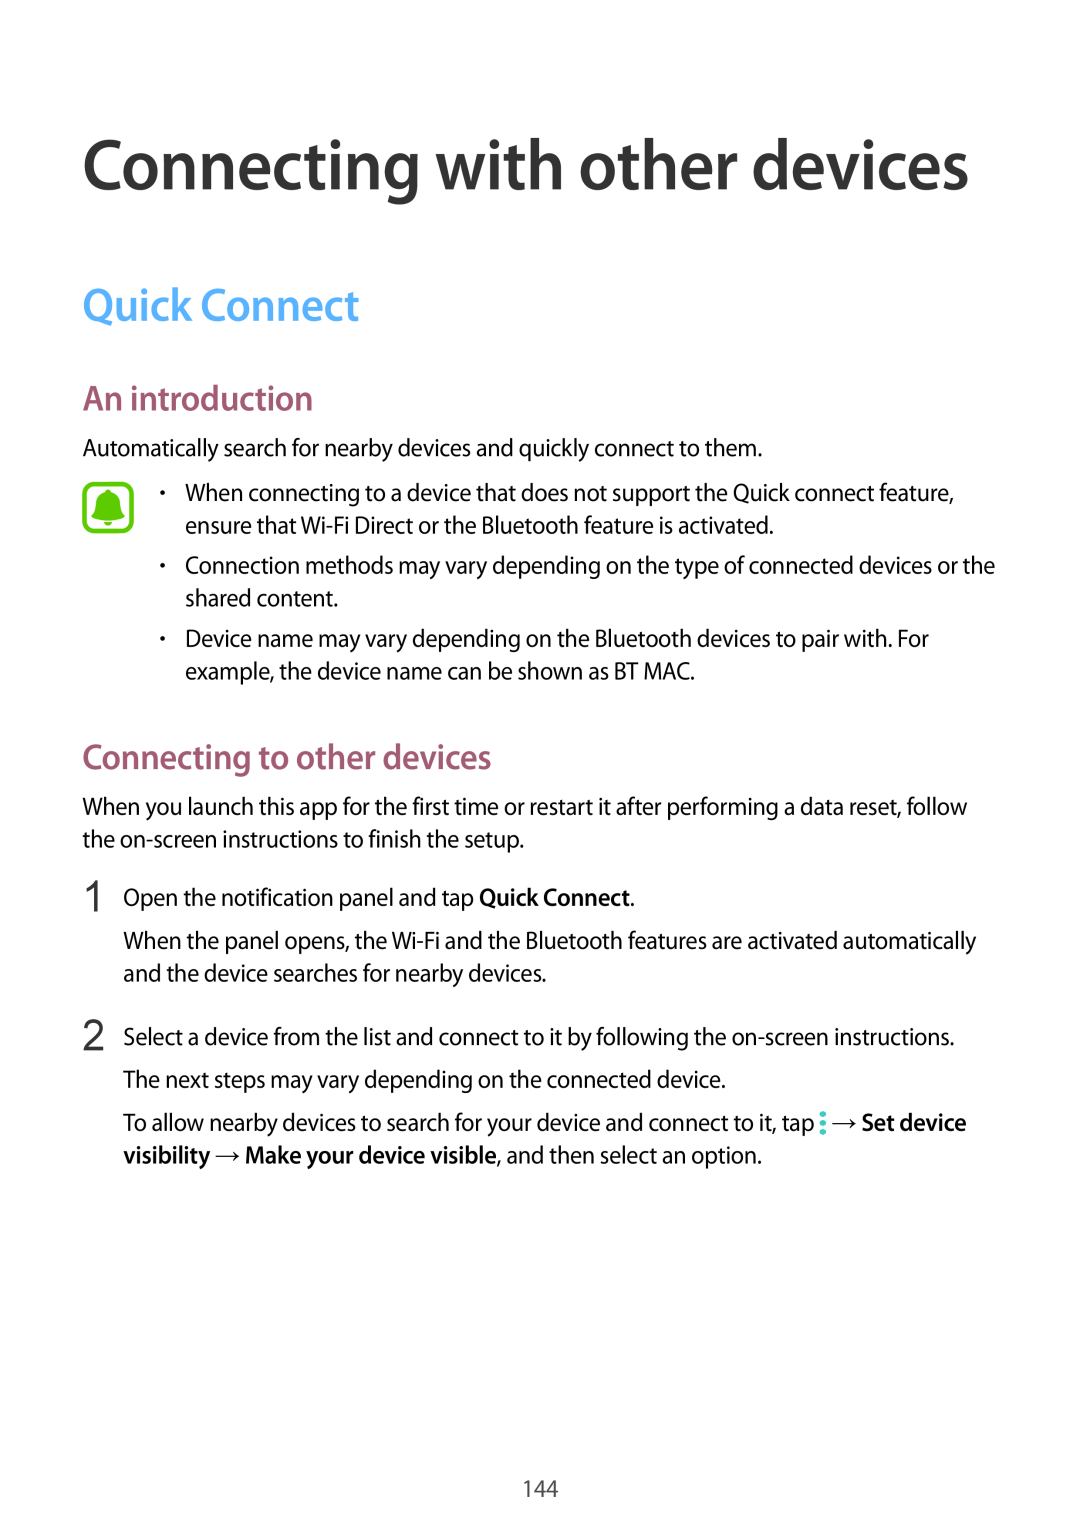 Samsung SM-N915FZWYXEH manual Quick Connect, Connecting to other devices, Connecting with other devices, An introduction 